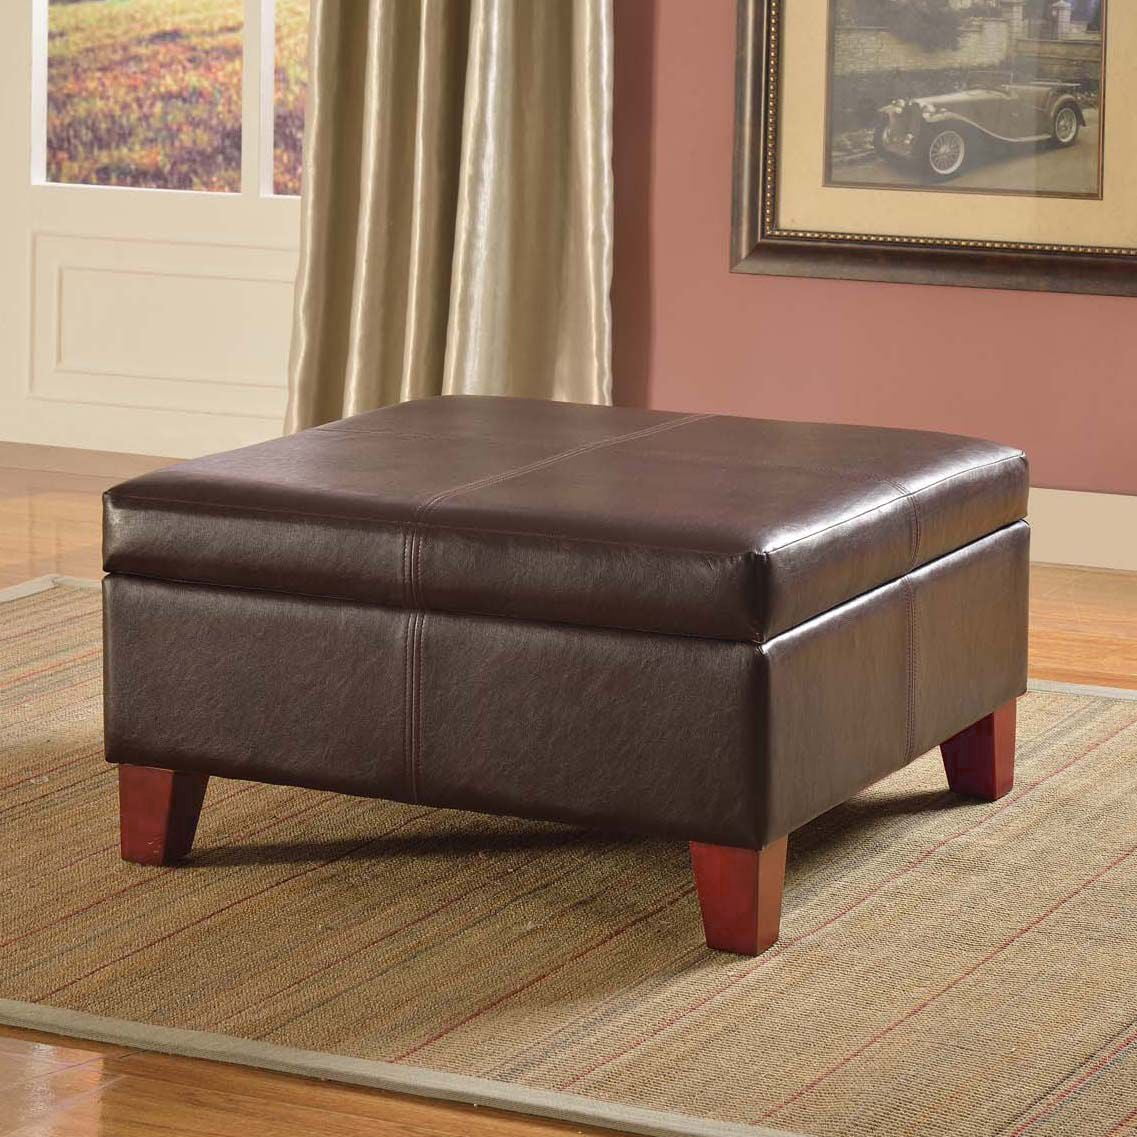 Homepop Luxury Large Faux Leather, Large Square Leather Ottoman With Storage